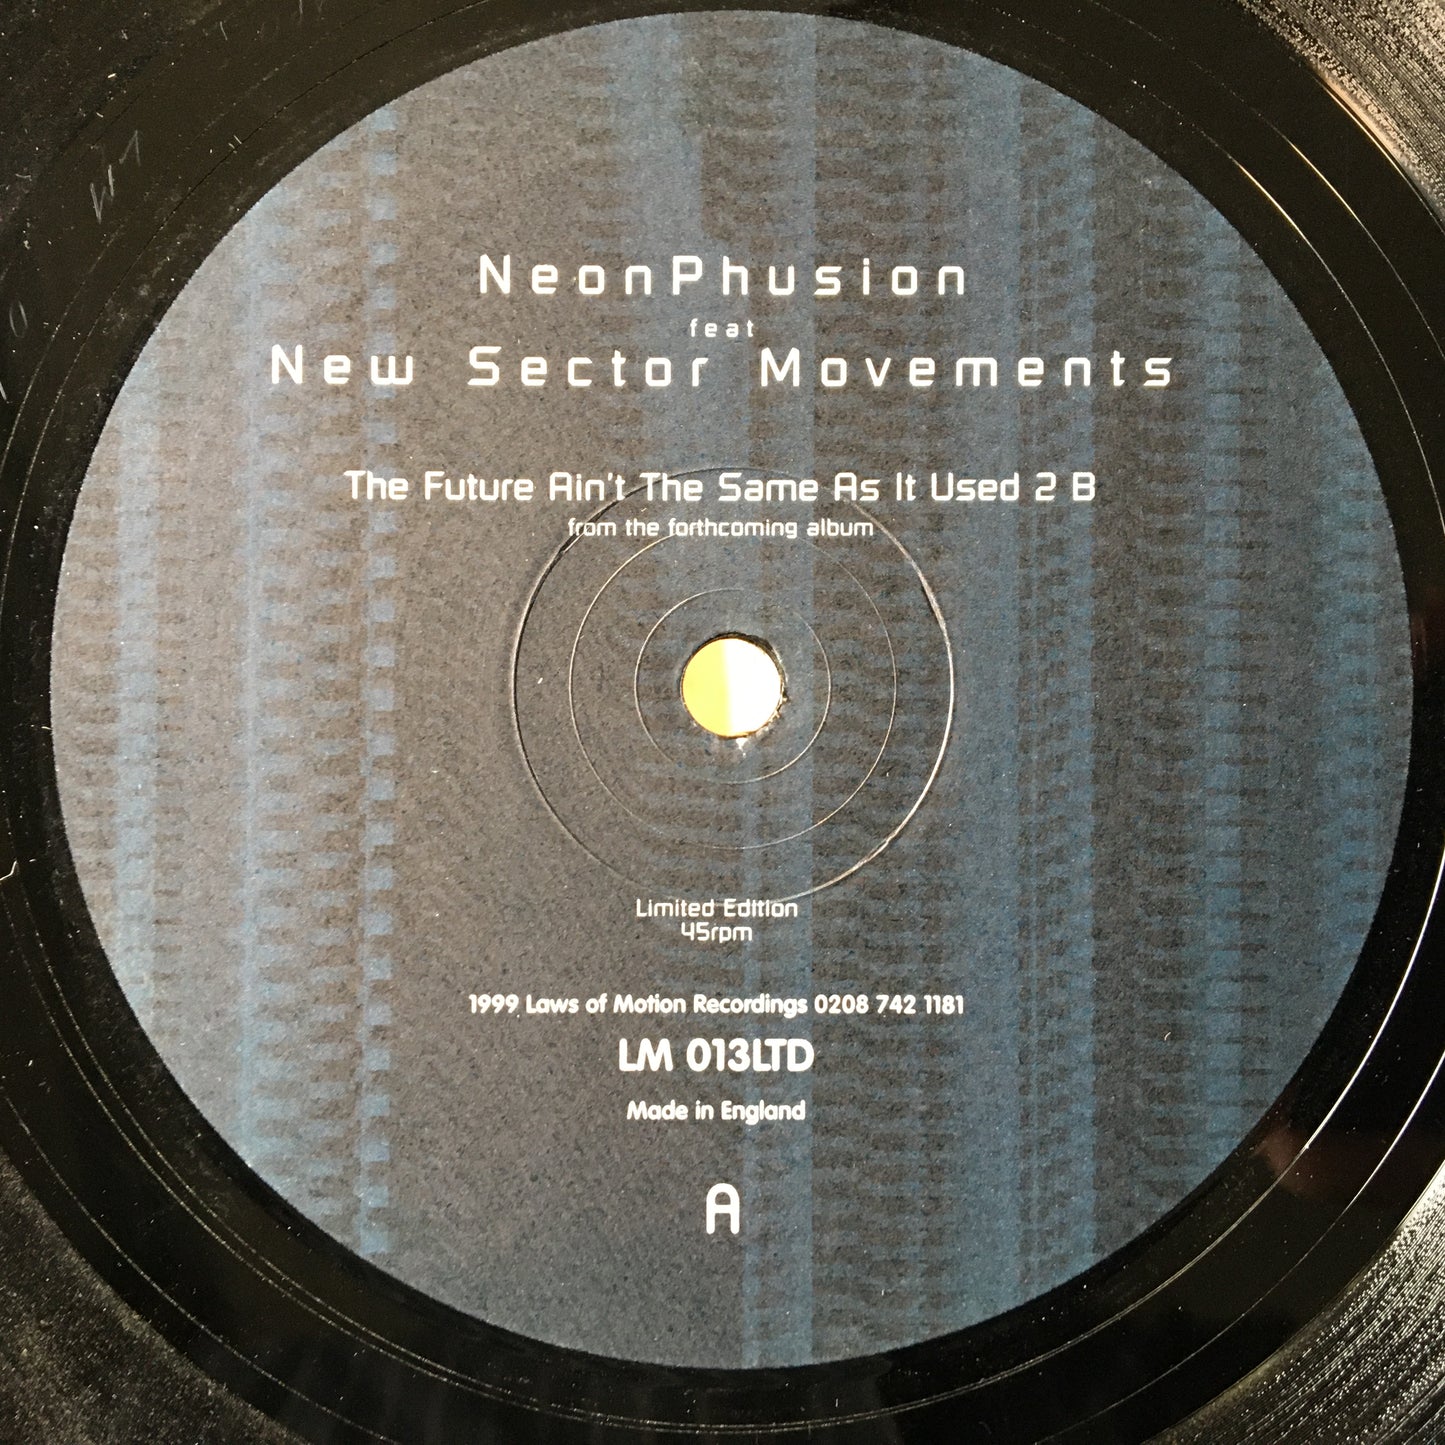 Neon Phusion – The Future Ain't The Same As It Used 2 B